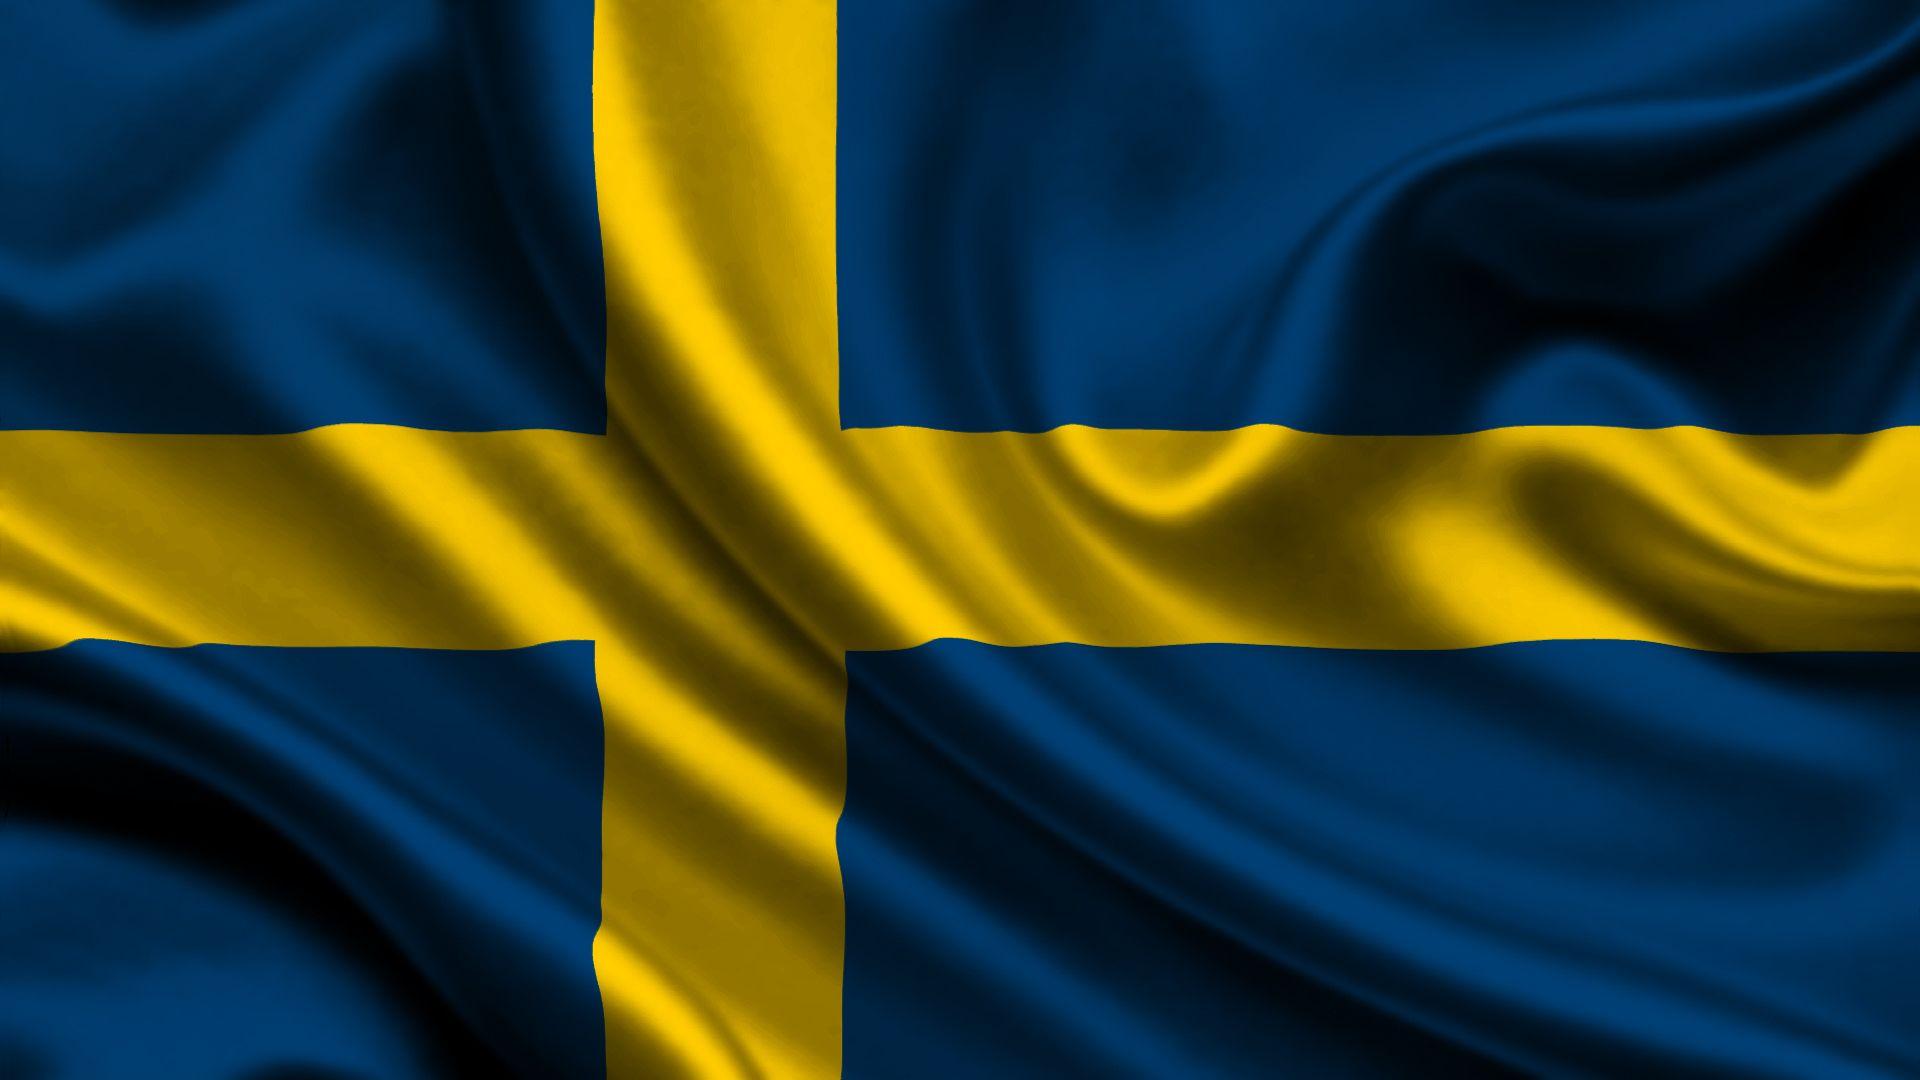 Flag Of Sweden wallpaper and image, picture, photo